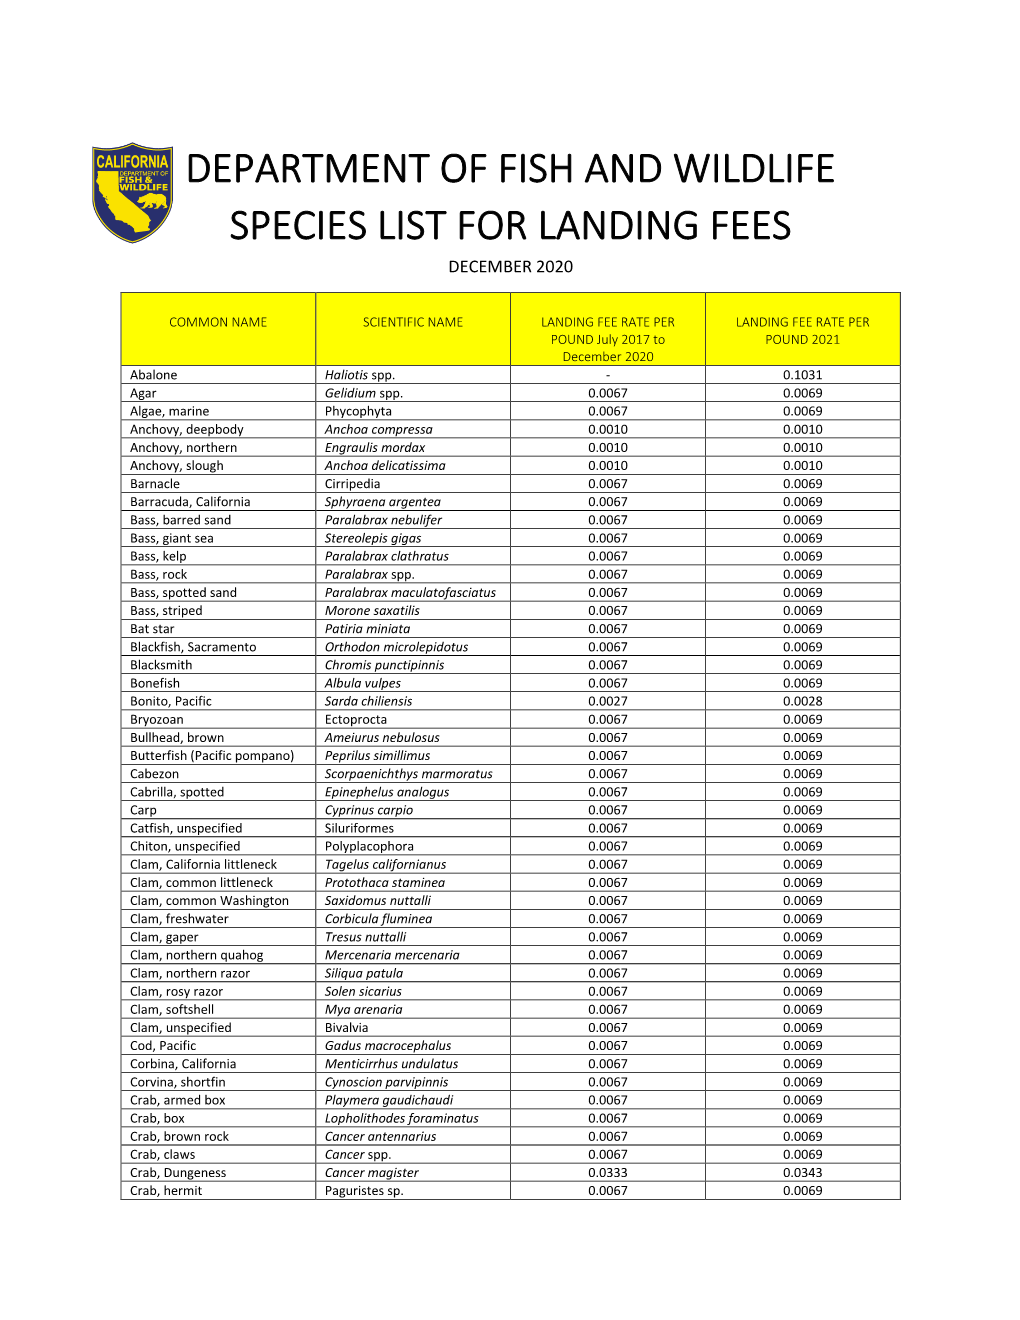 Department of Fish and Wildlife Species Code List for Landing Fees